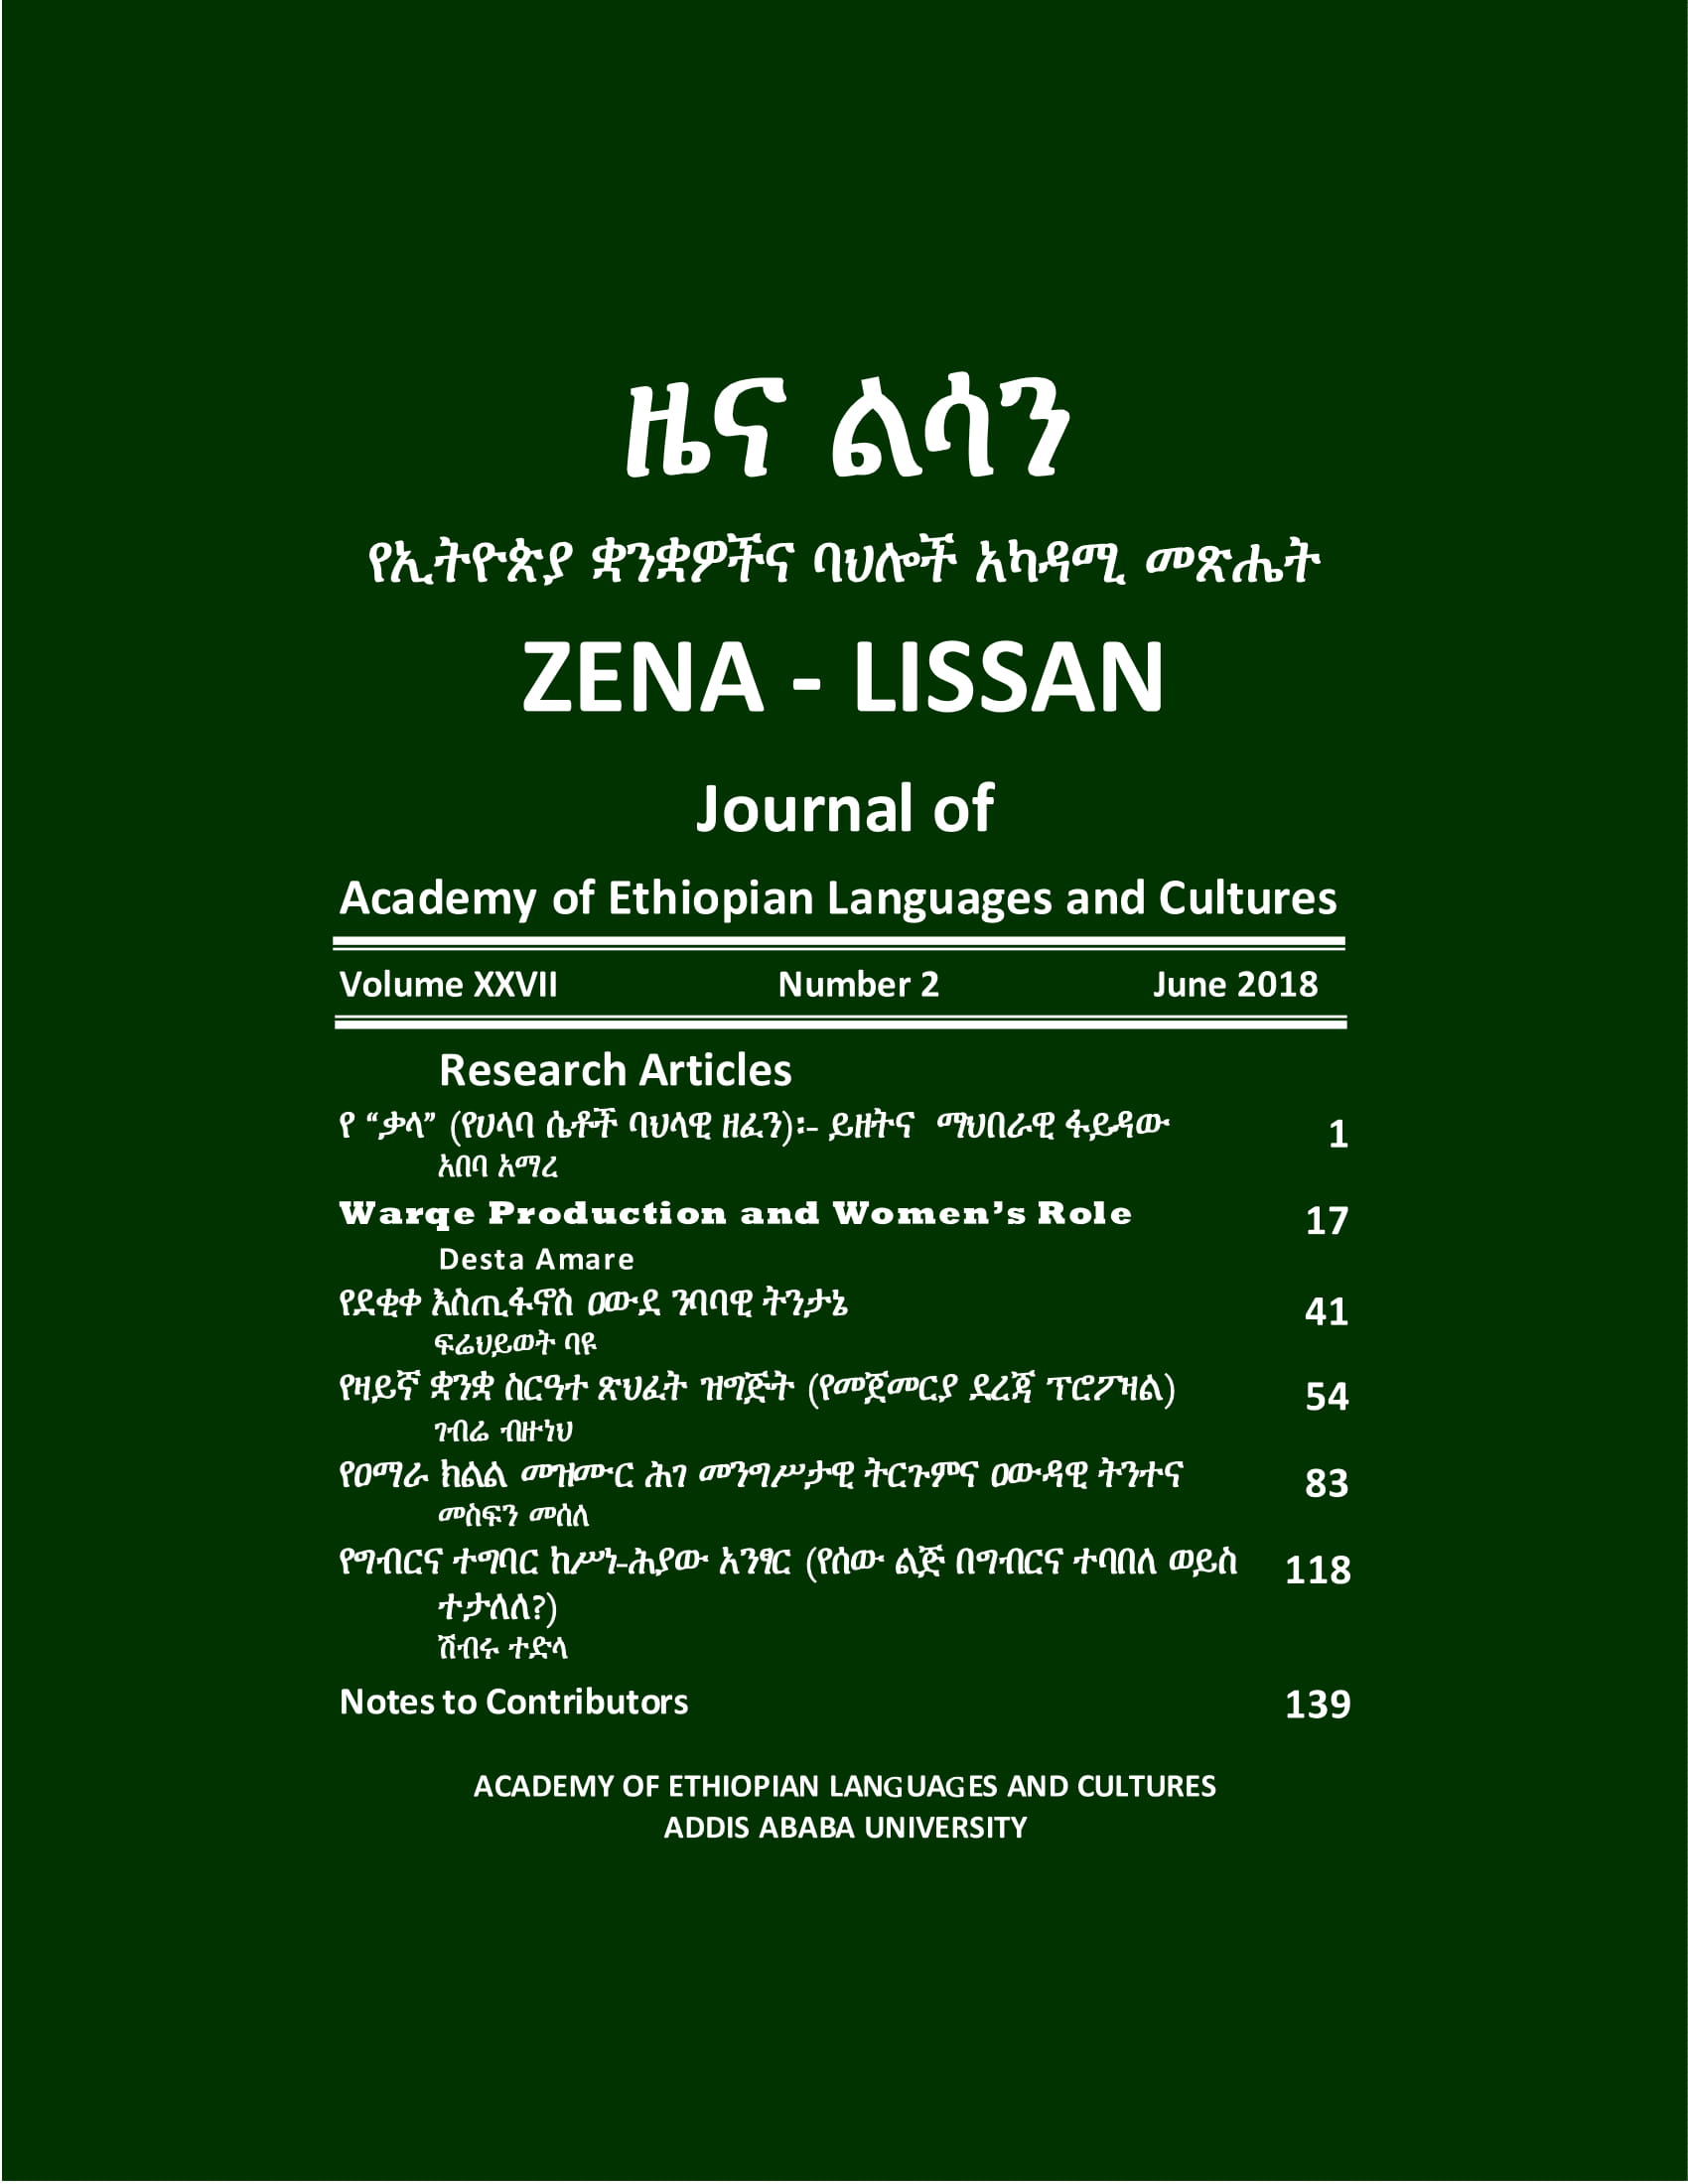 					View Vol. 27 No. 2 (2018): ZENA-LISSAN Journal of Ethiopian Languages and Cultures
				